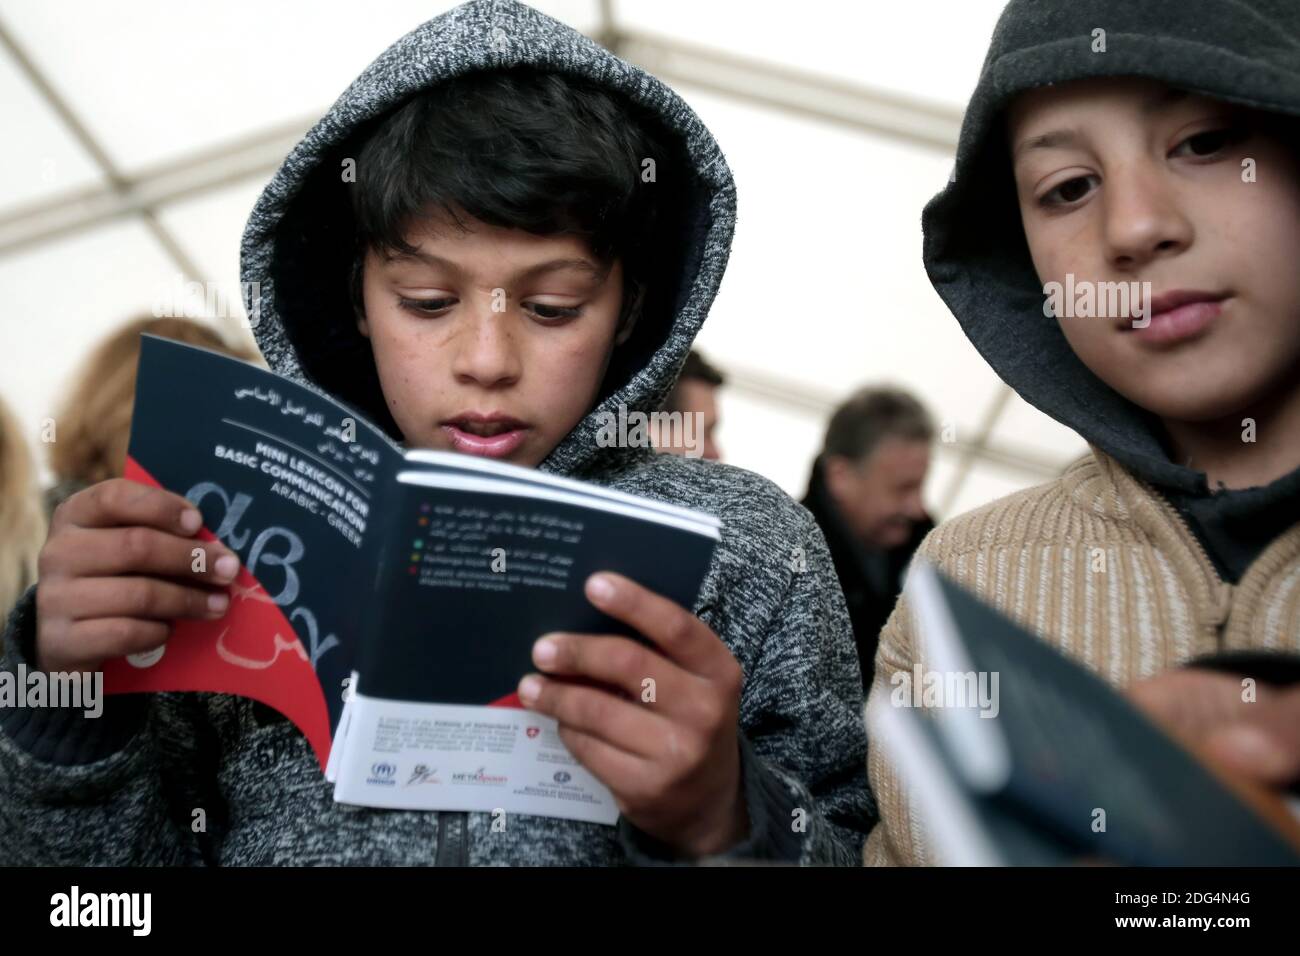 Refugee boys look at lexicons given by Greek Migration Minister and the Ambassador of Switzerland in Greece, at the Eleonas camp in Athens, Greece, on January 30, 2017. The mini lexicons, in six dialects (Arabic, Farsi, Sorani, French, Kirmantzi, Urdu) with translation in Greek and English, aim to communicate informations to migrants in Greece. Photo by Panayotis Tzamaros/ABACAPRESS.COM Stock Photo